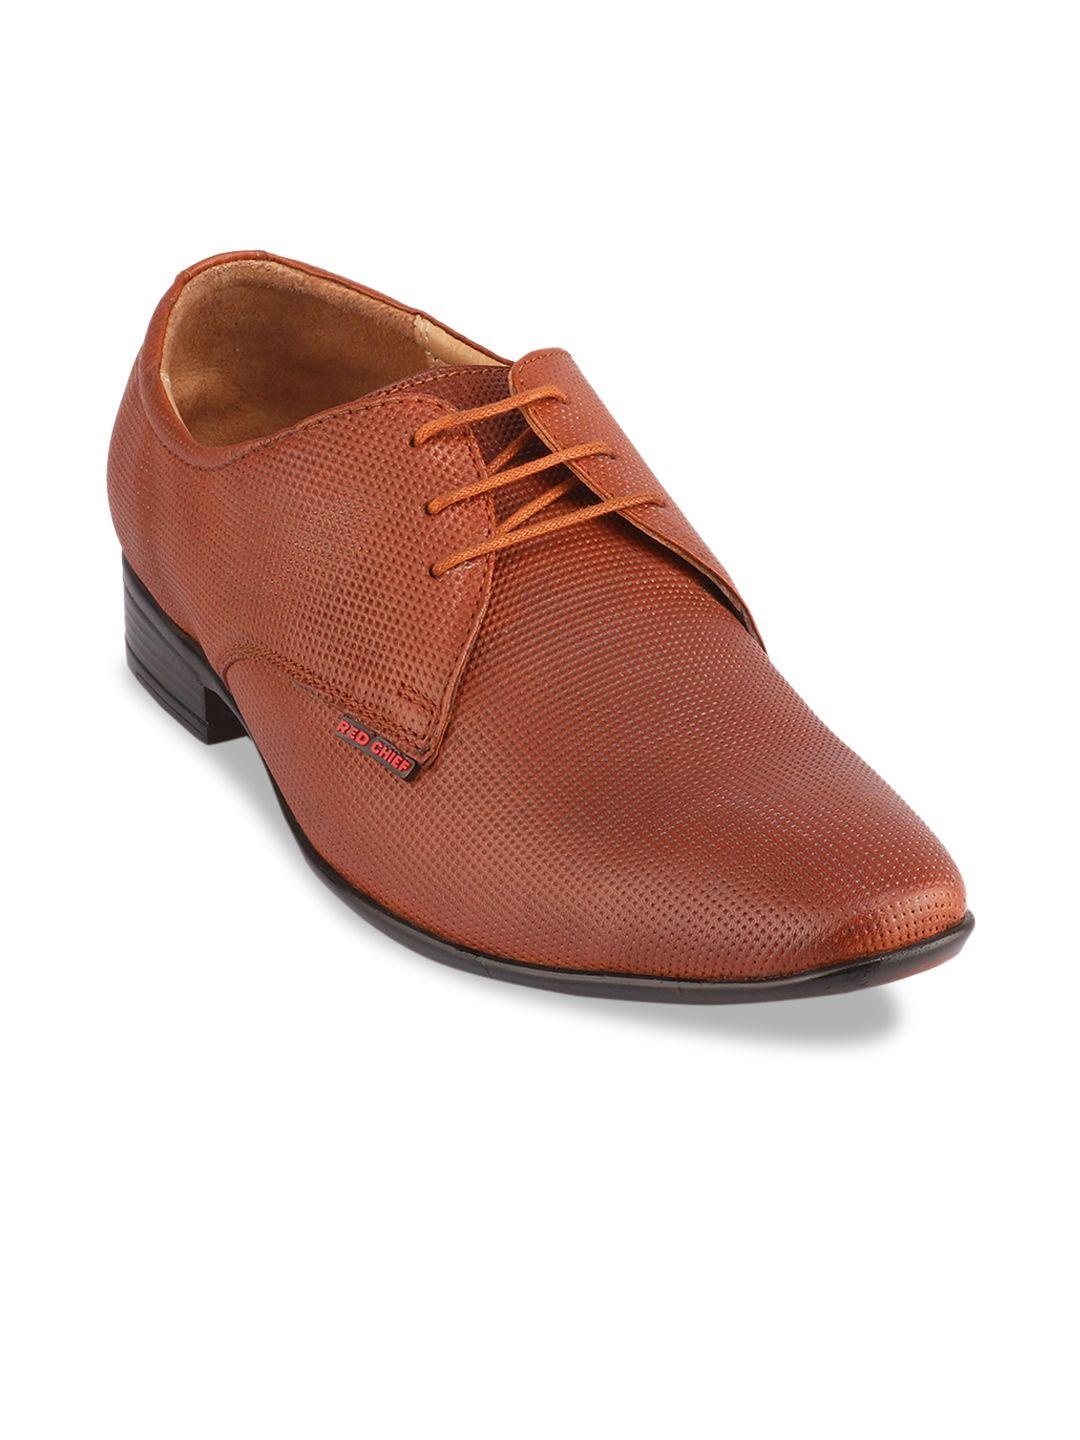 red-chief-men-tan-textured-leather-formal-derbys